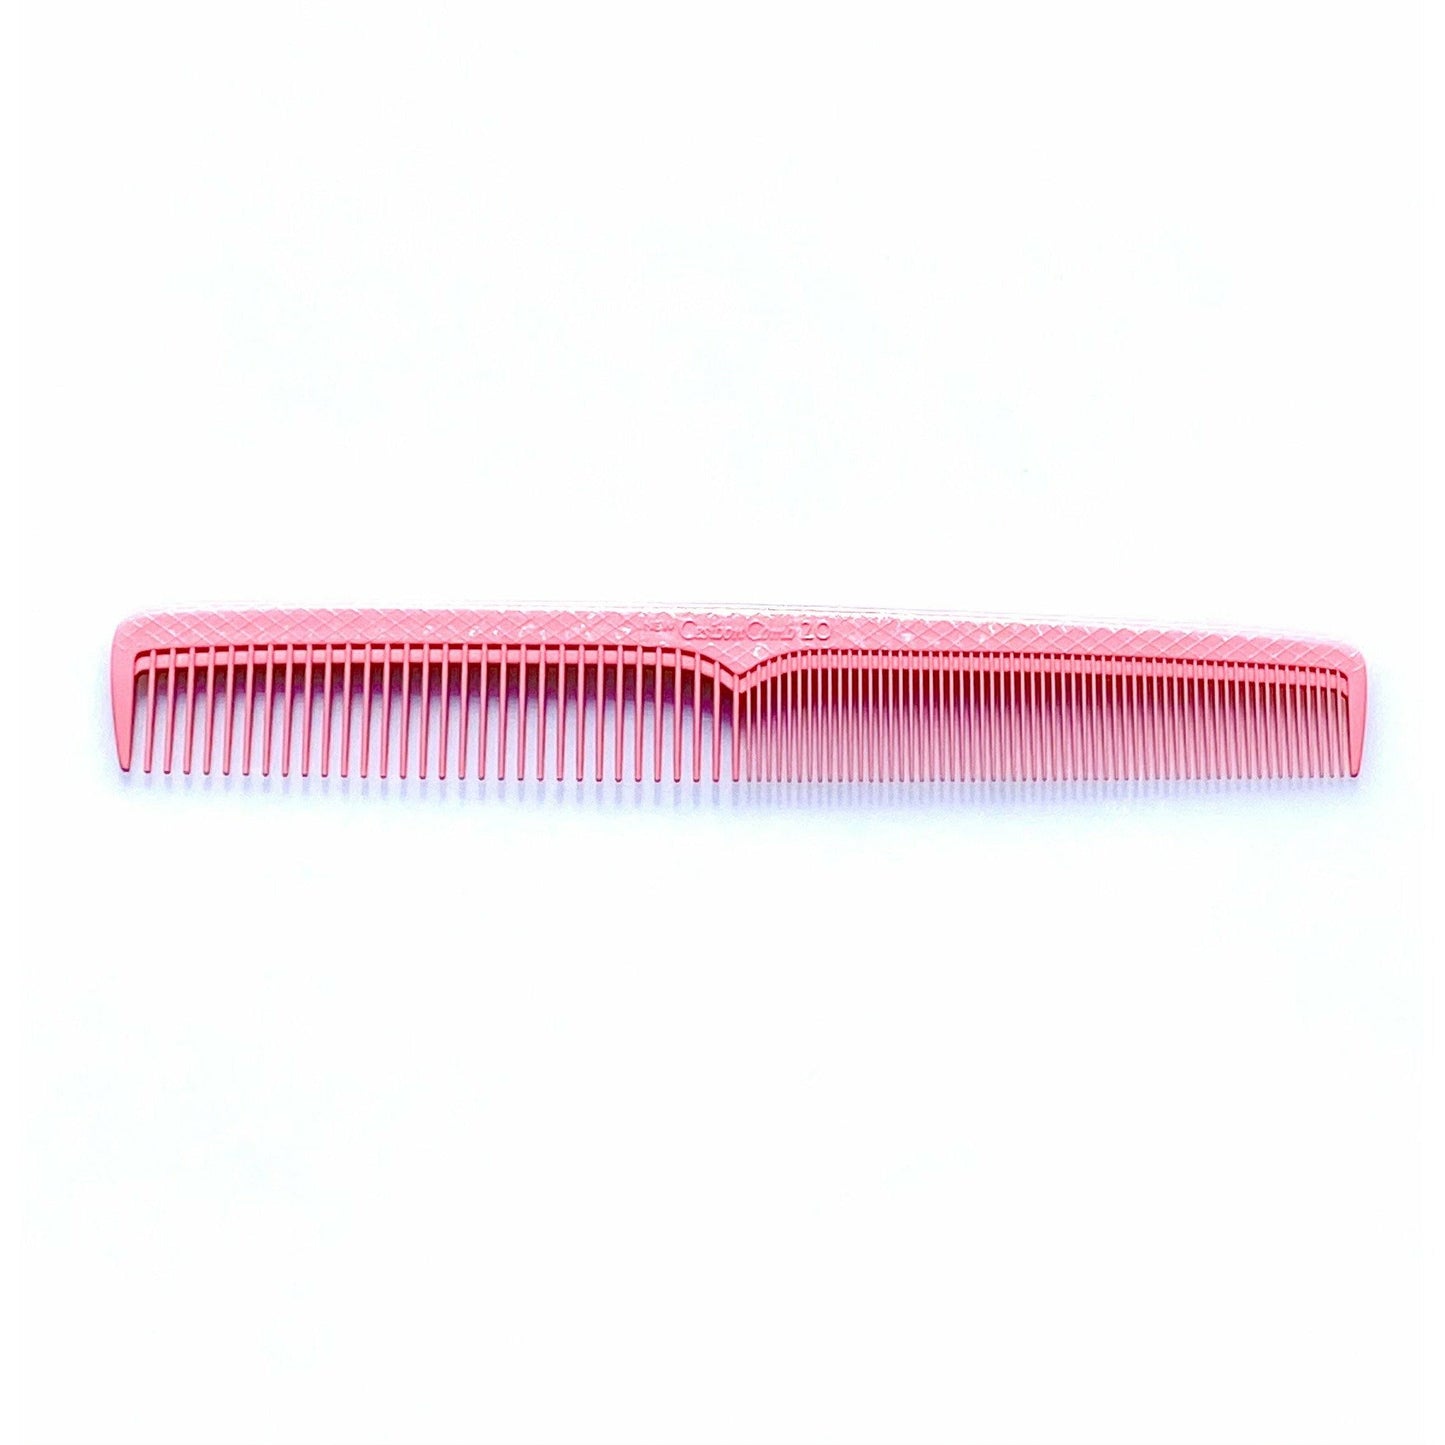 Cesibon20 Combs Beuy Pro Pink 